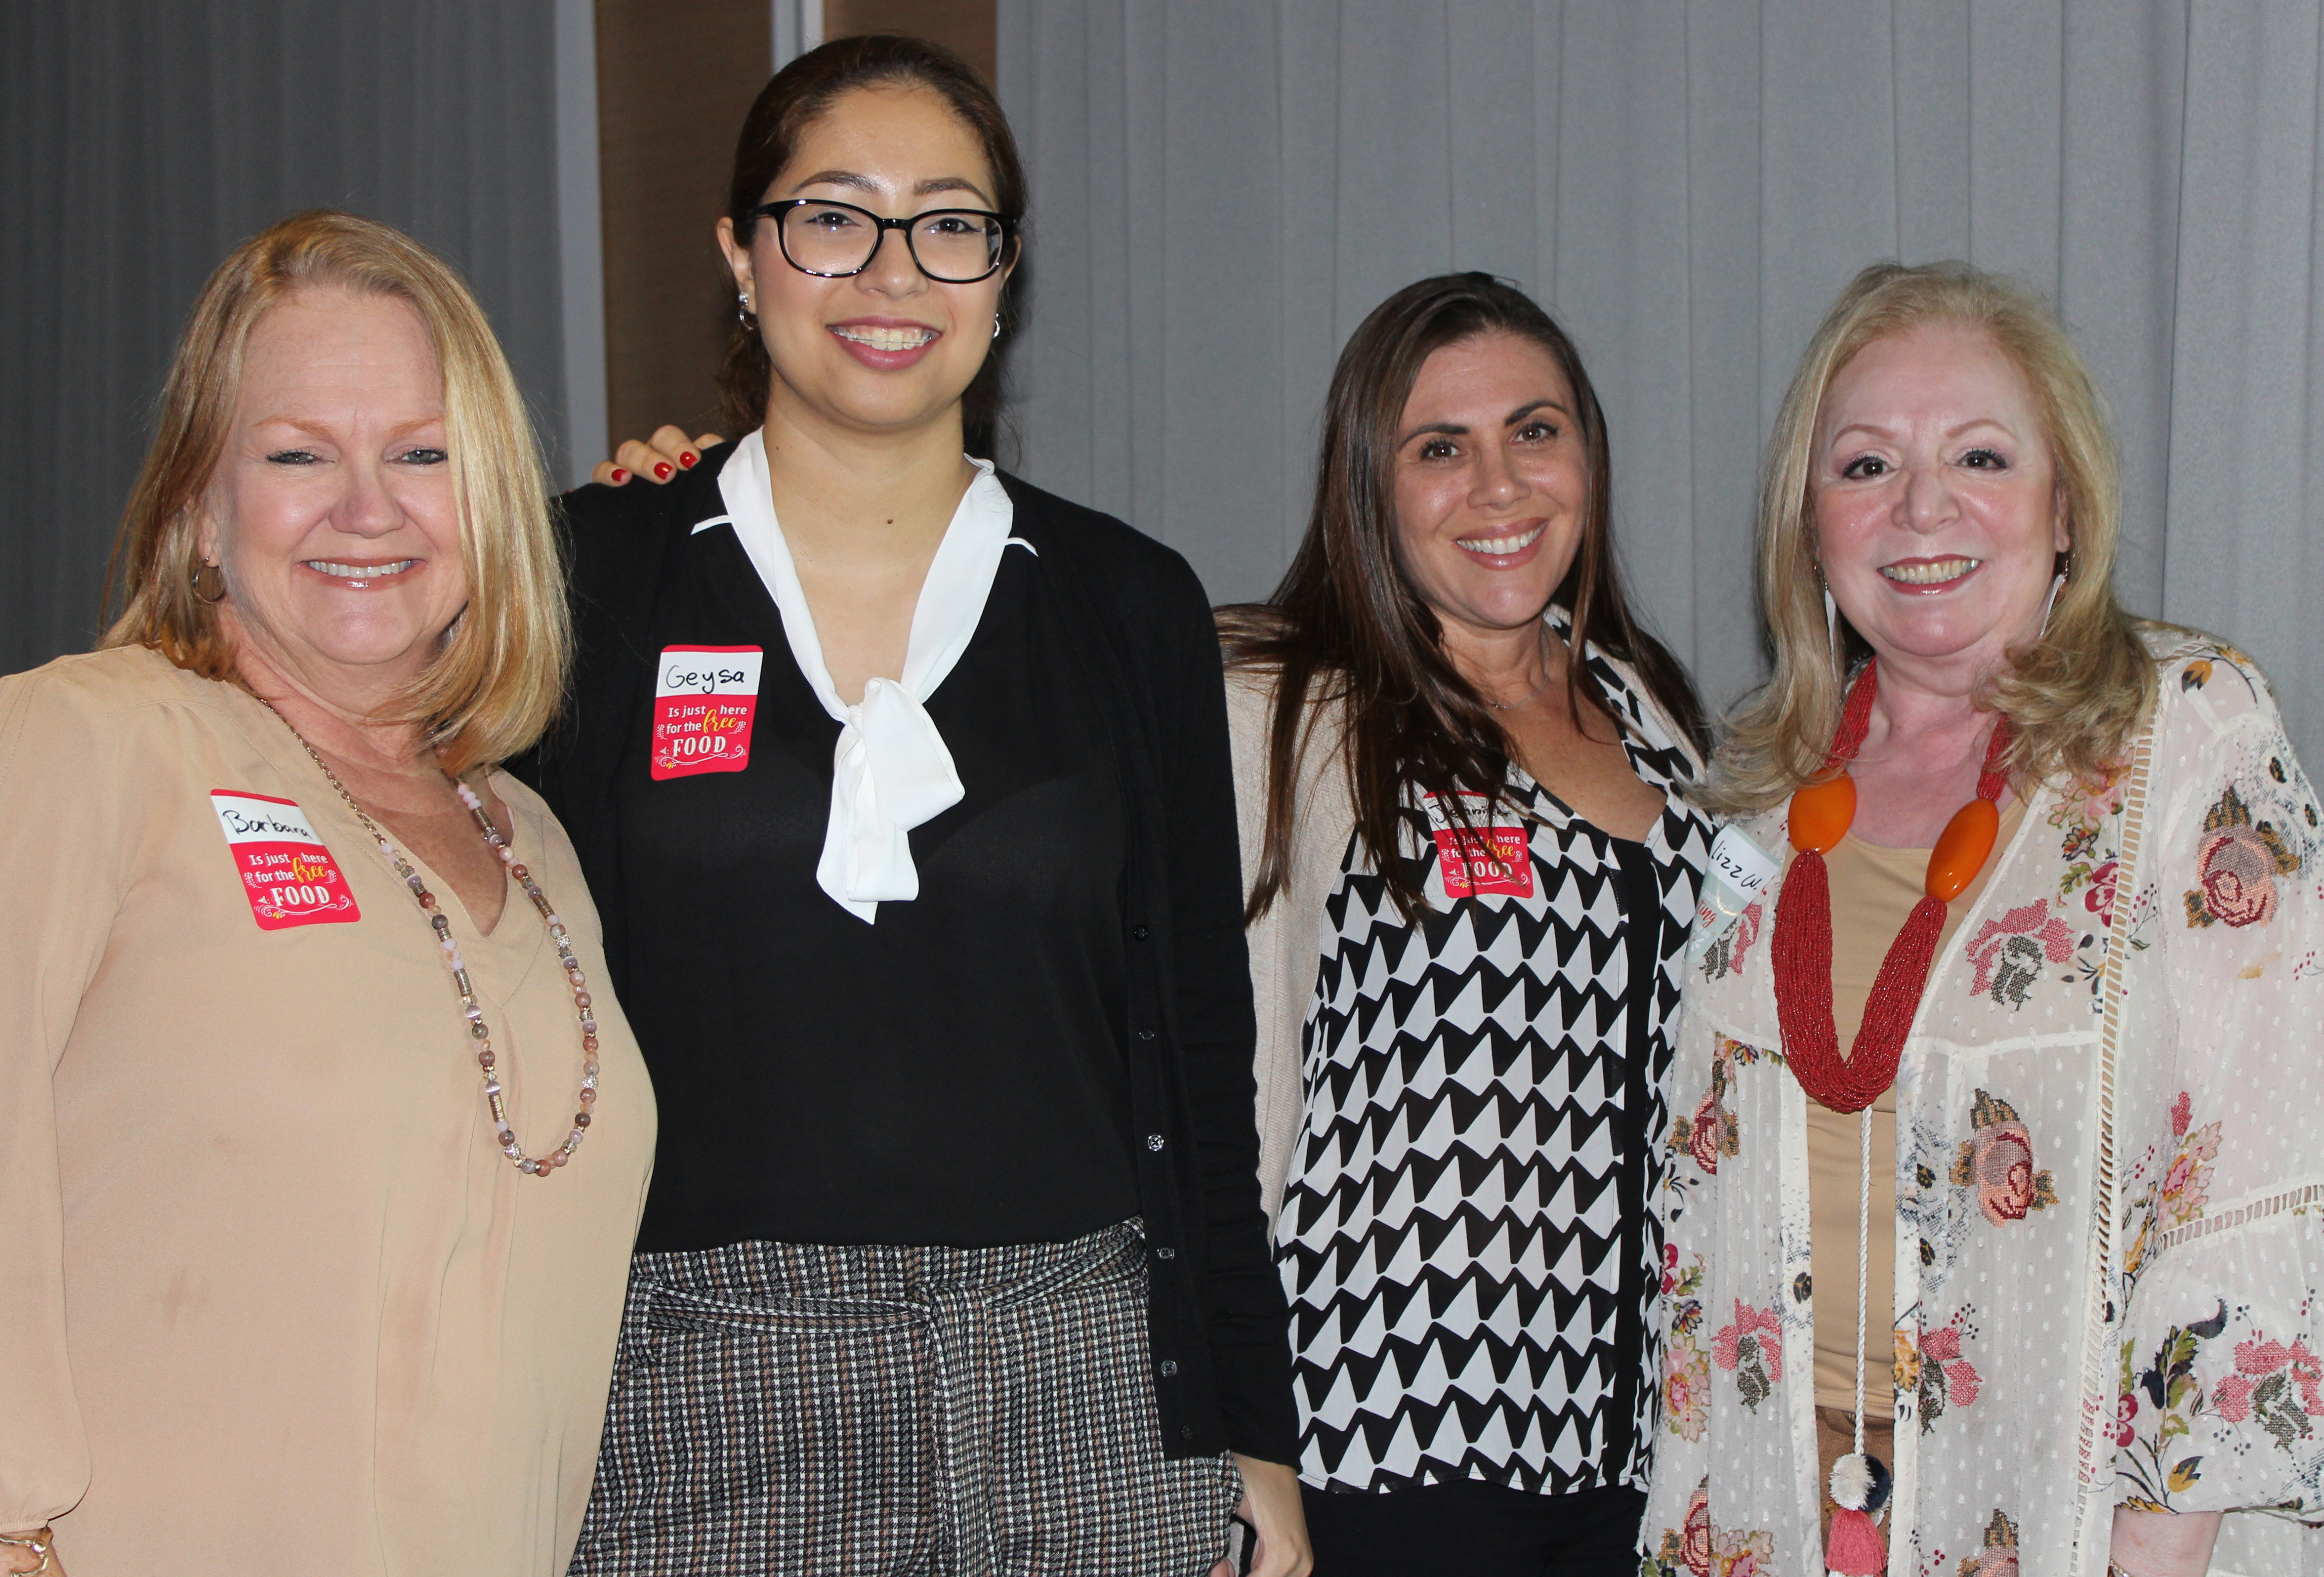 Doral Chamber of Commerce introduces a group of female members taking a photo together at Topgolf Doral Networking Luncheon Event.